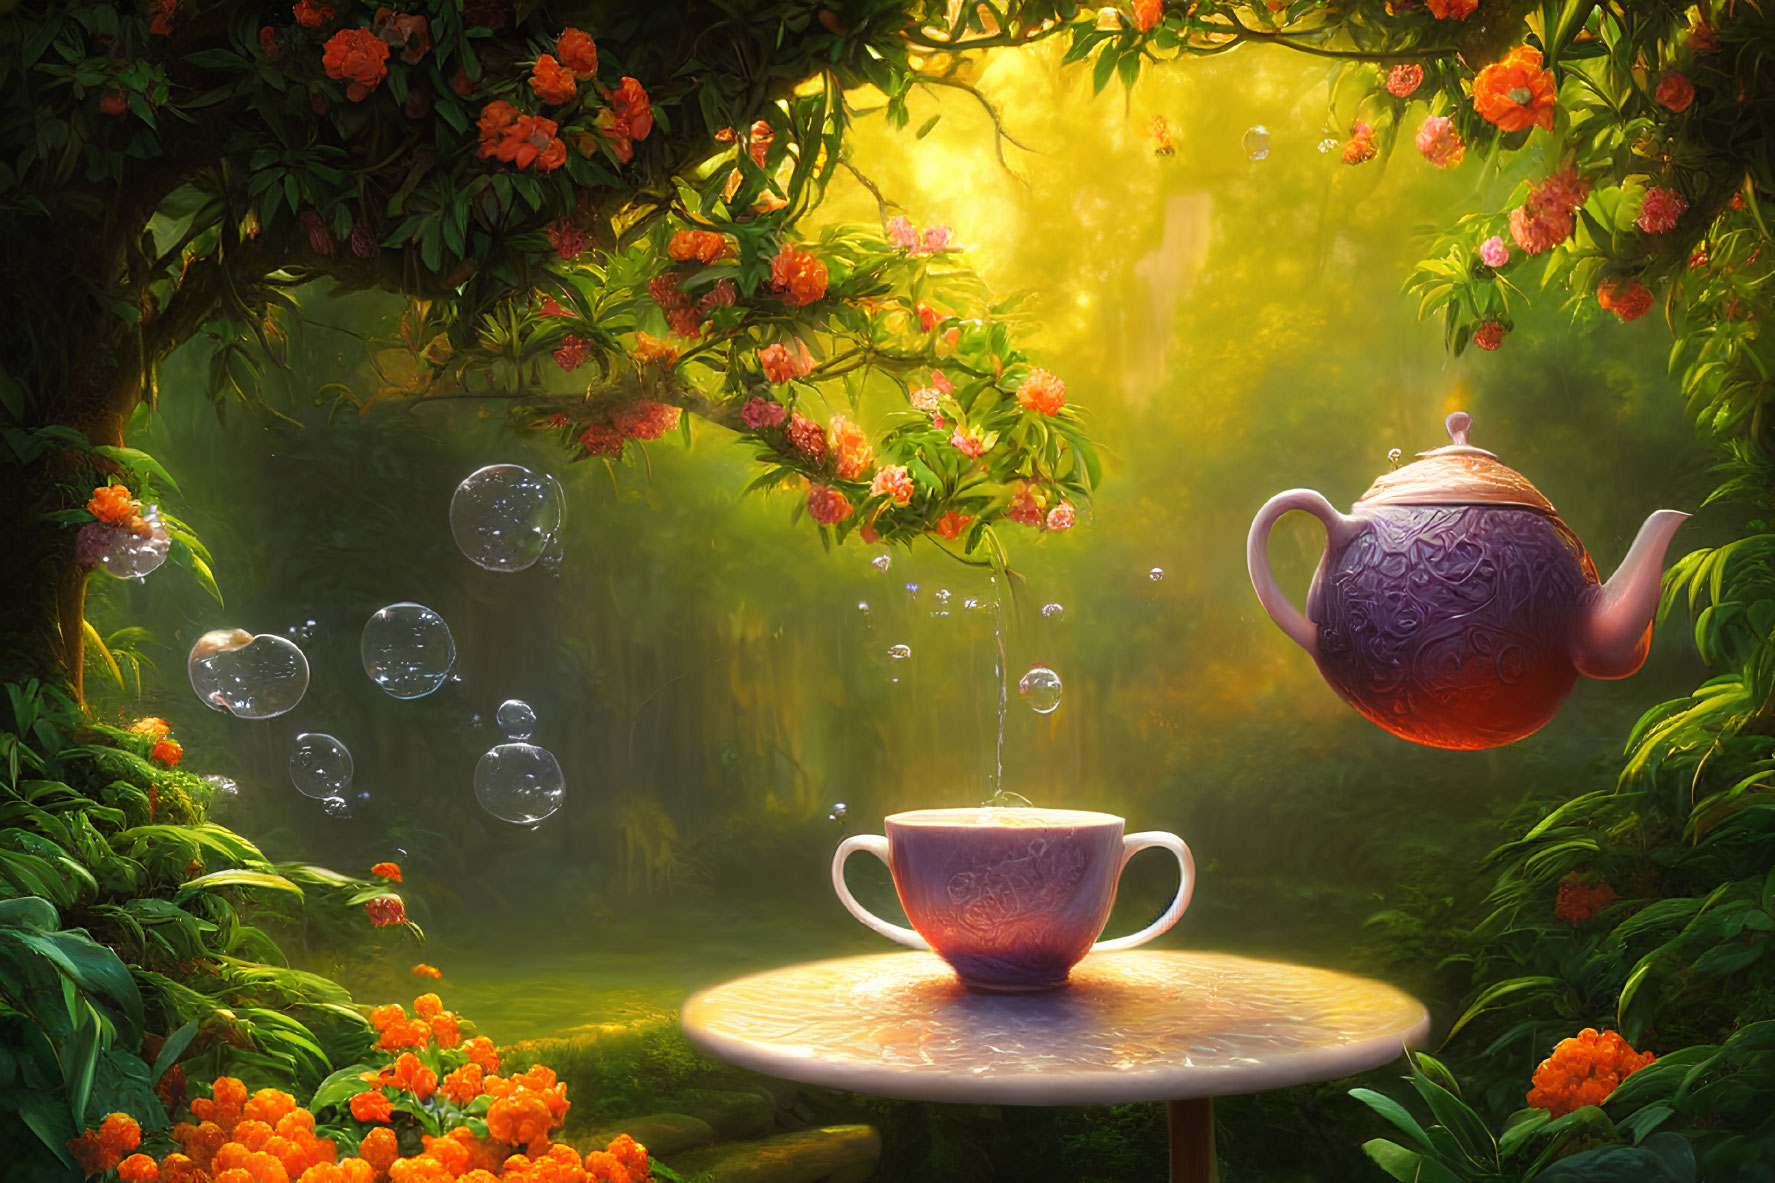 Floating teapot pours into cup in magical garden scene